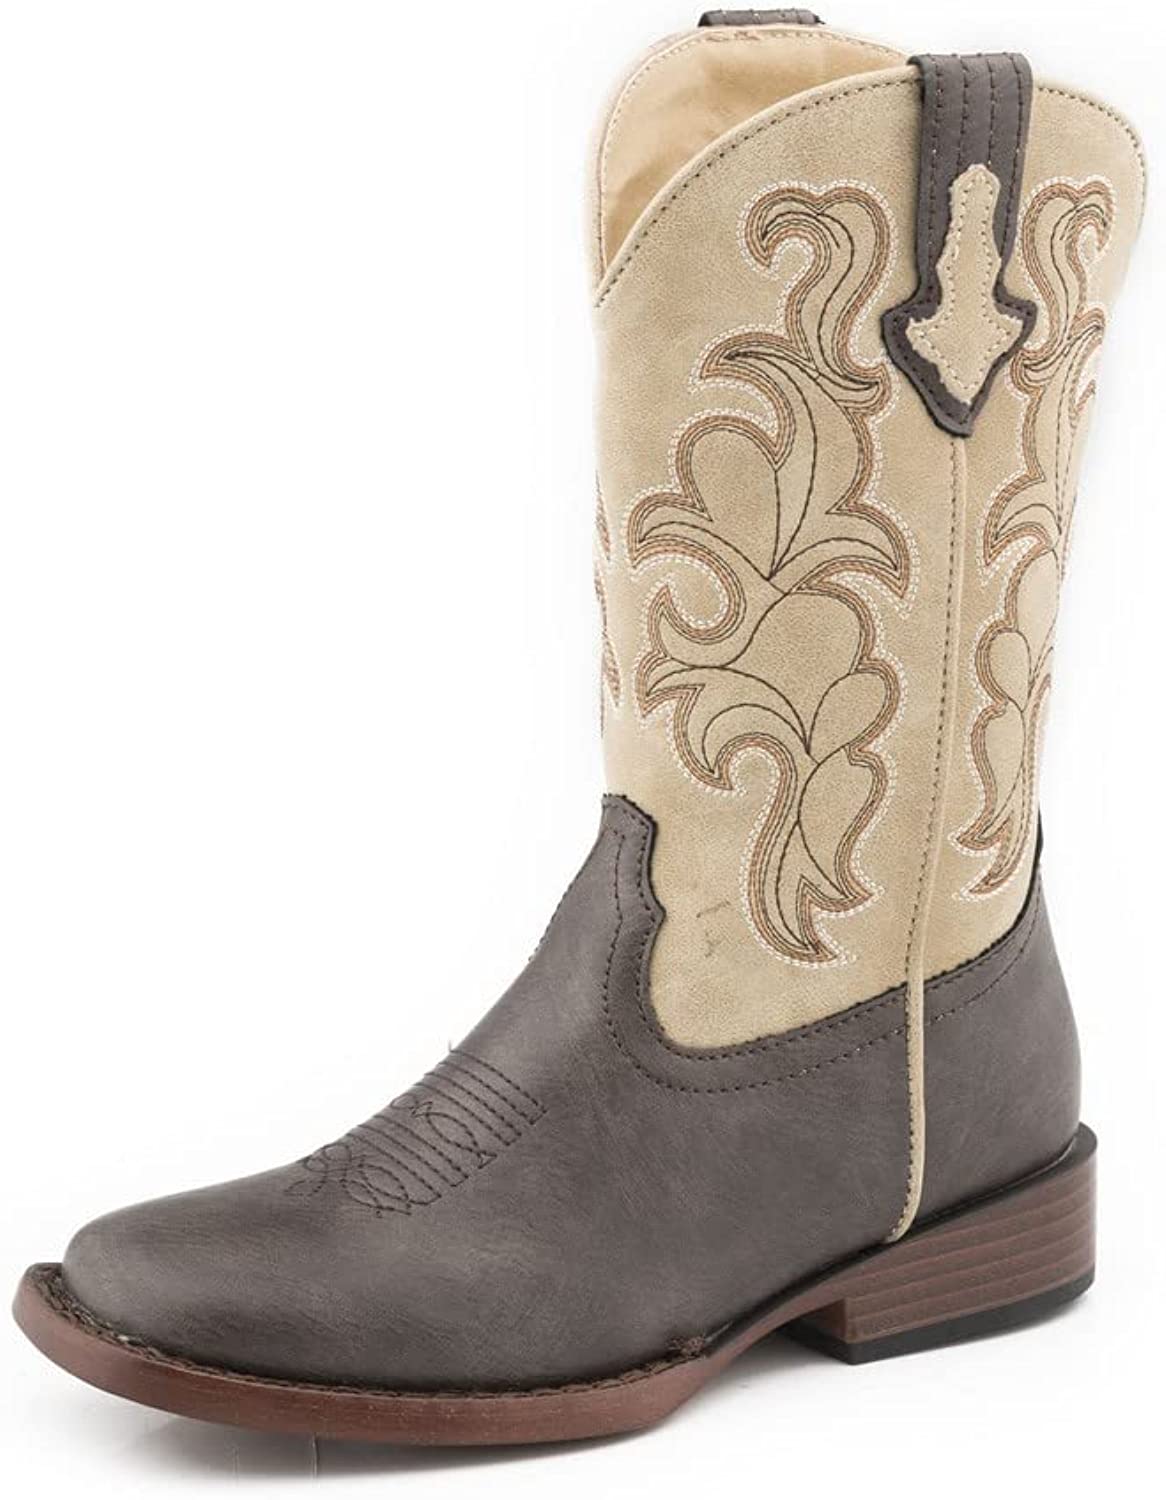 ROPER Men’s Blaze Synthetic Performance Western Boot Broad Square Toe Brown 10.5 D(M) US